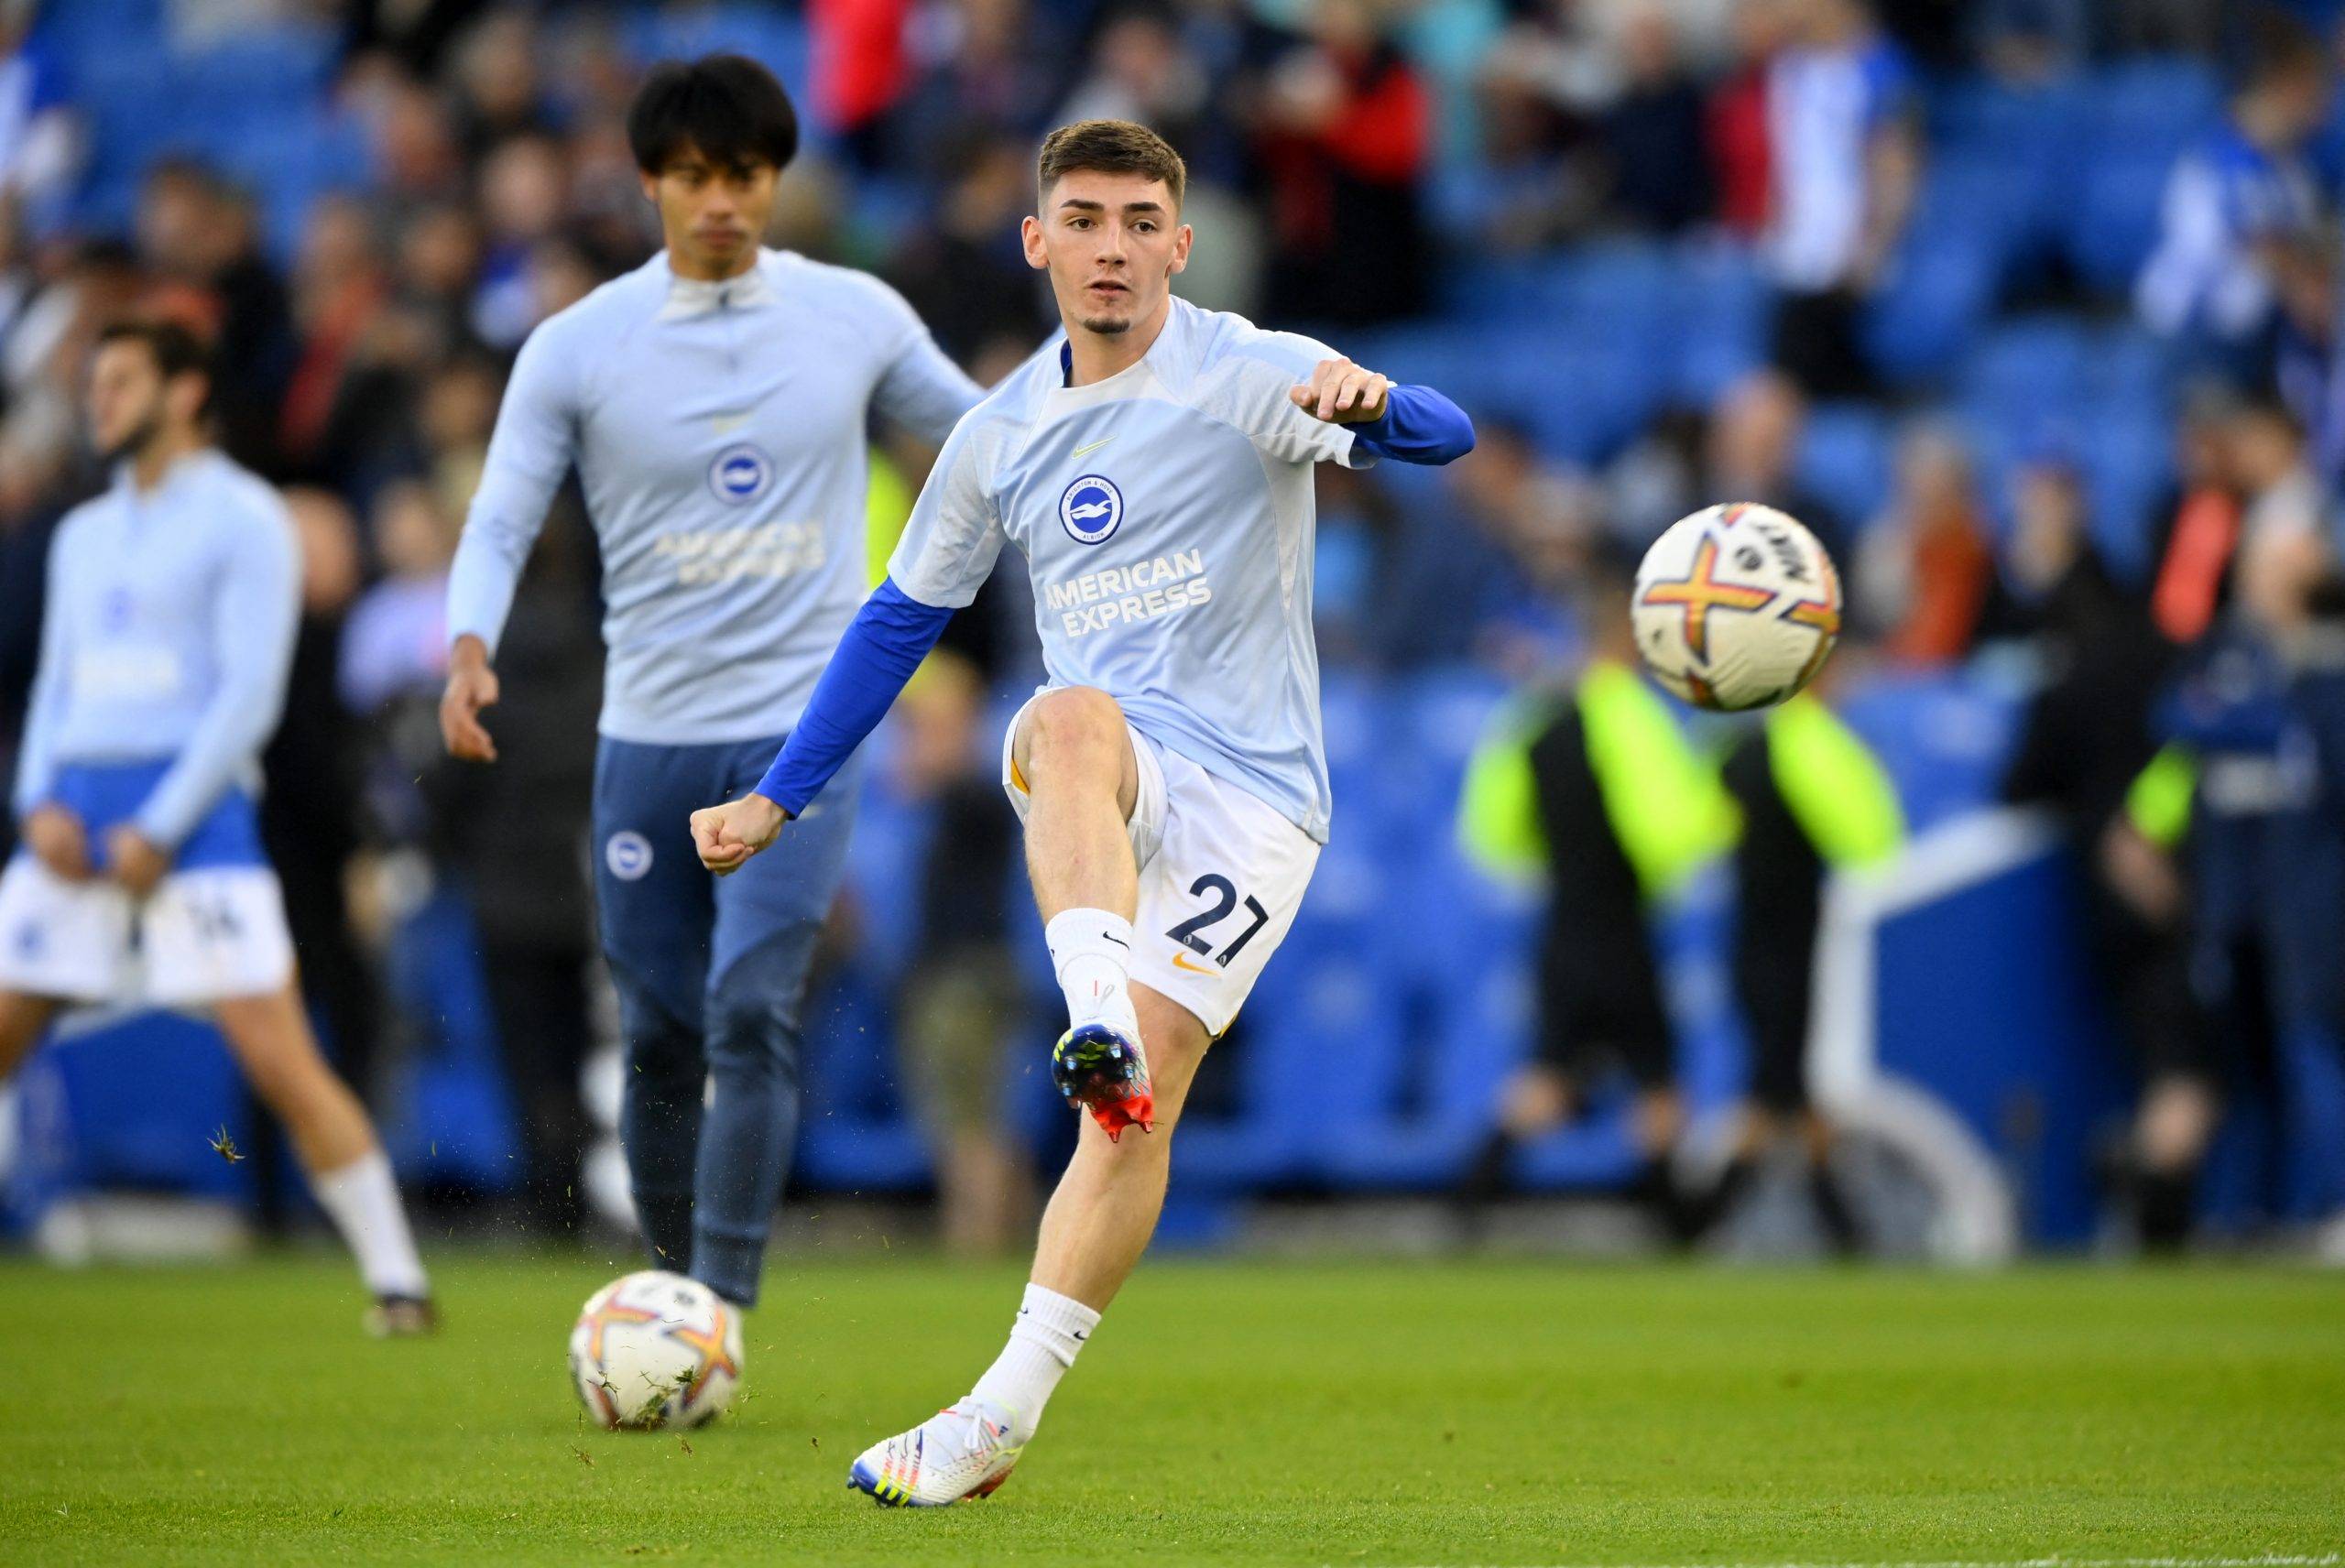 Rangers: BBC Pundit bigs up Rangers pull for Billy Gilmour - Rangers News